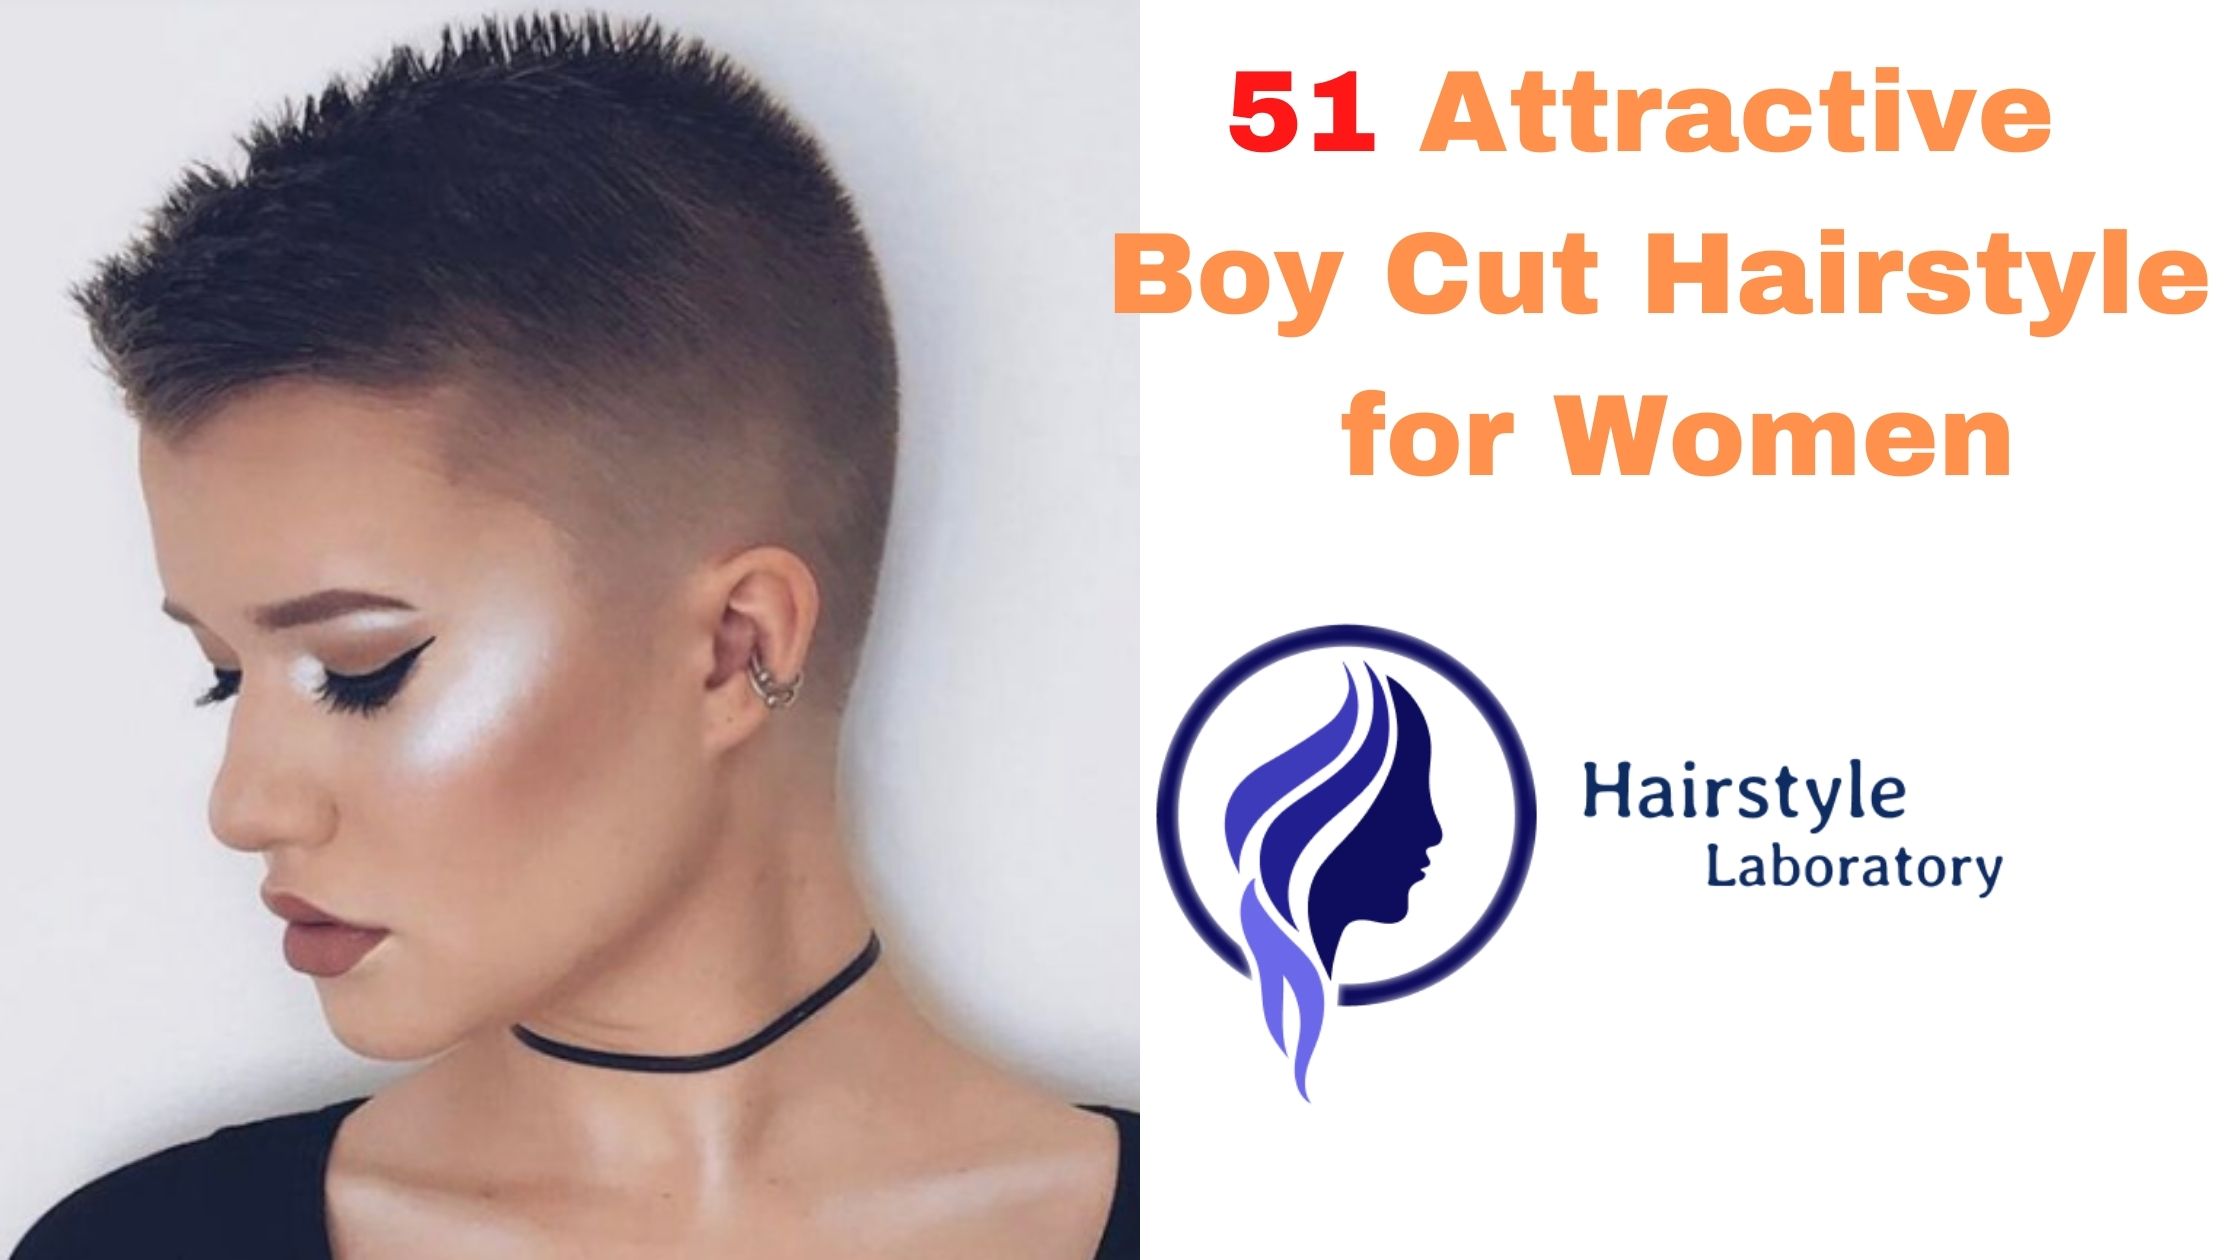 51 Attractive Boy Cut Hairstyle for Women